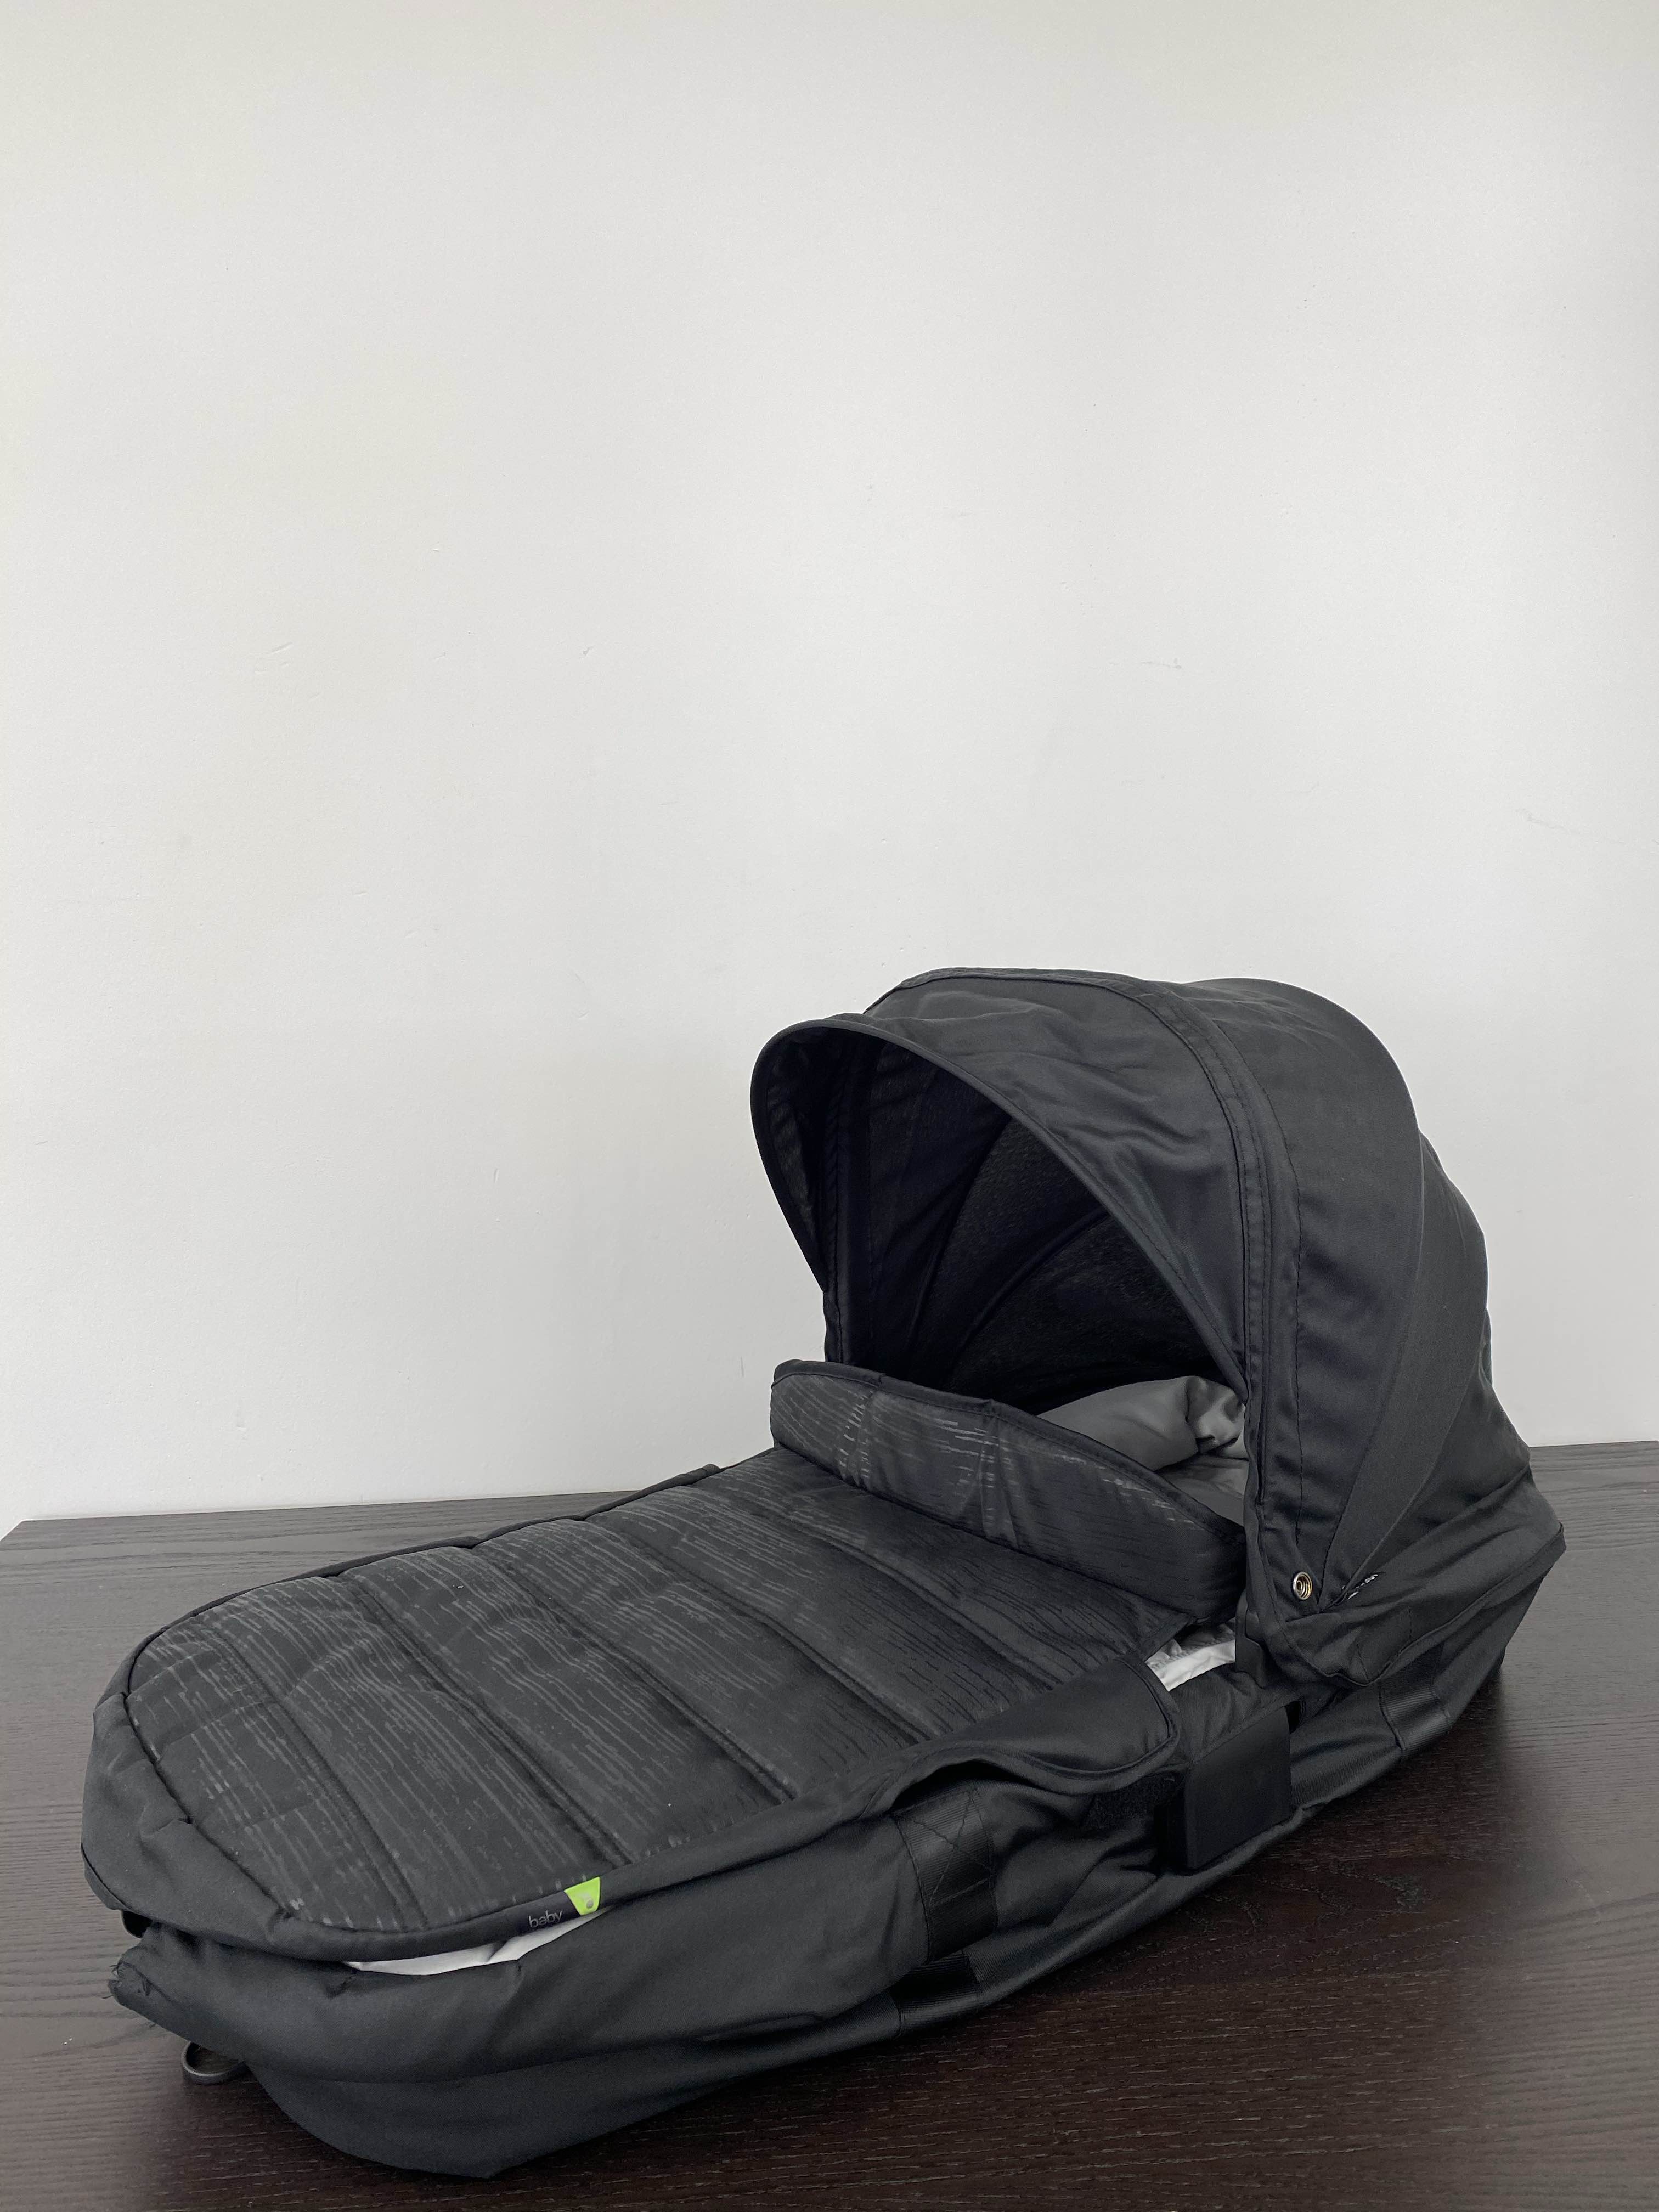 baby jogger city carrycot